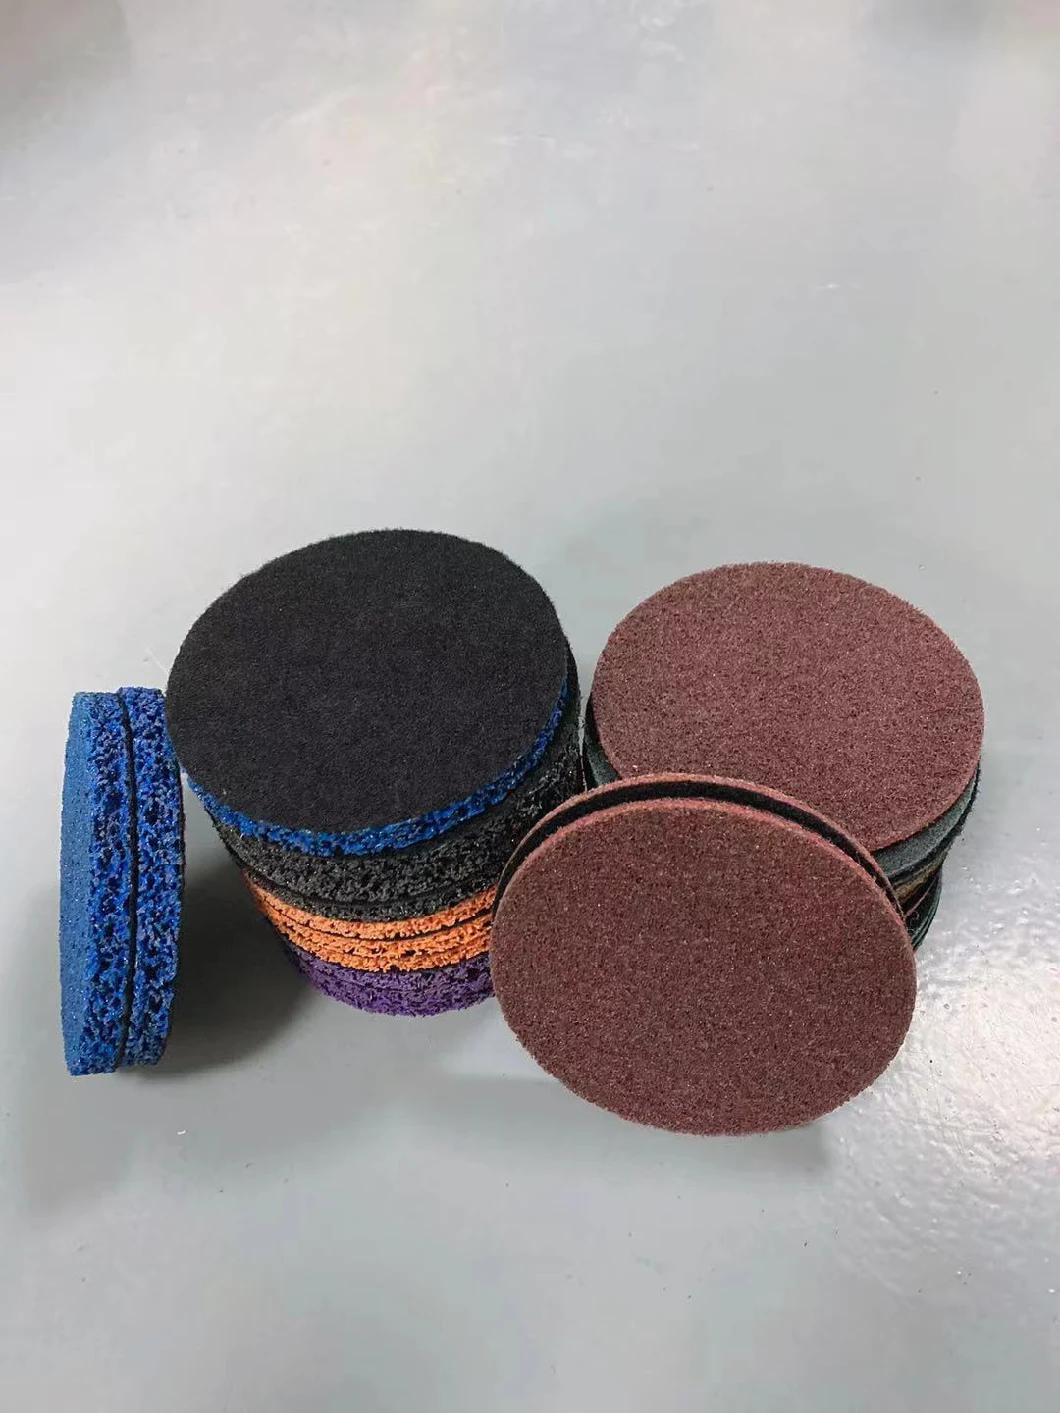 Easy Strip and Clean Disc with Black Velcro